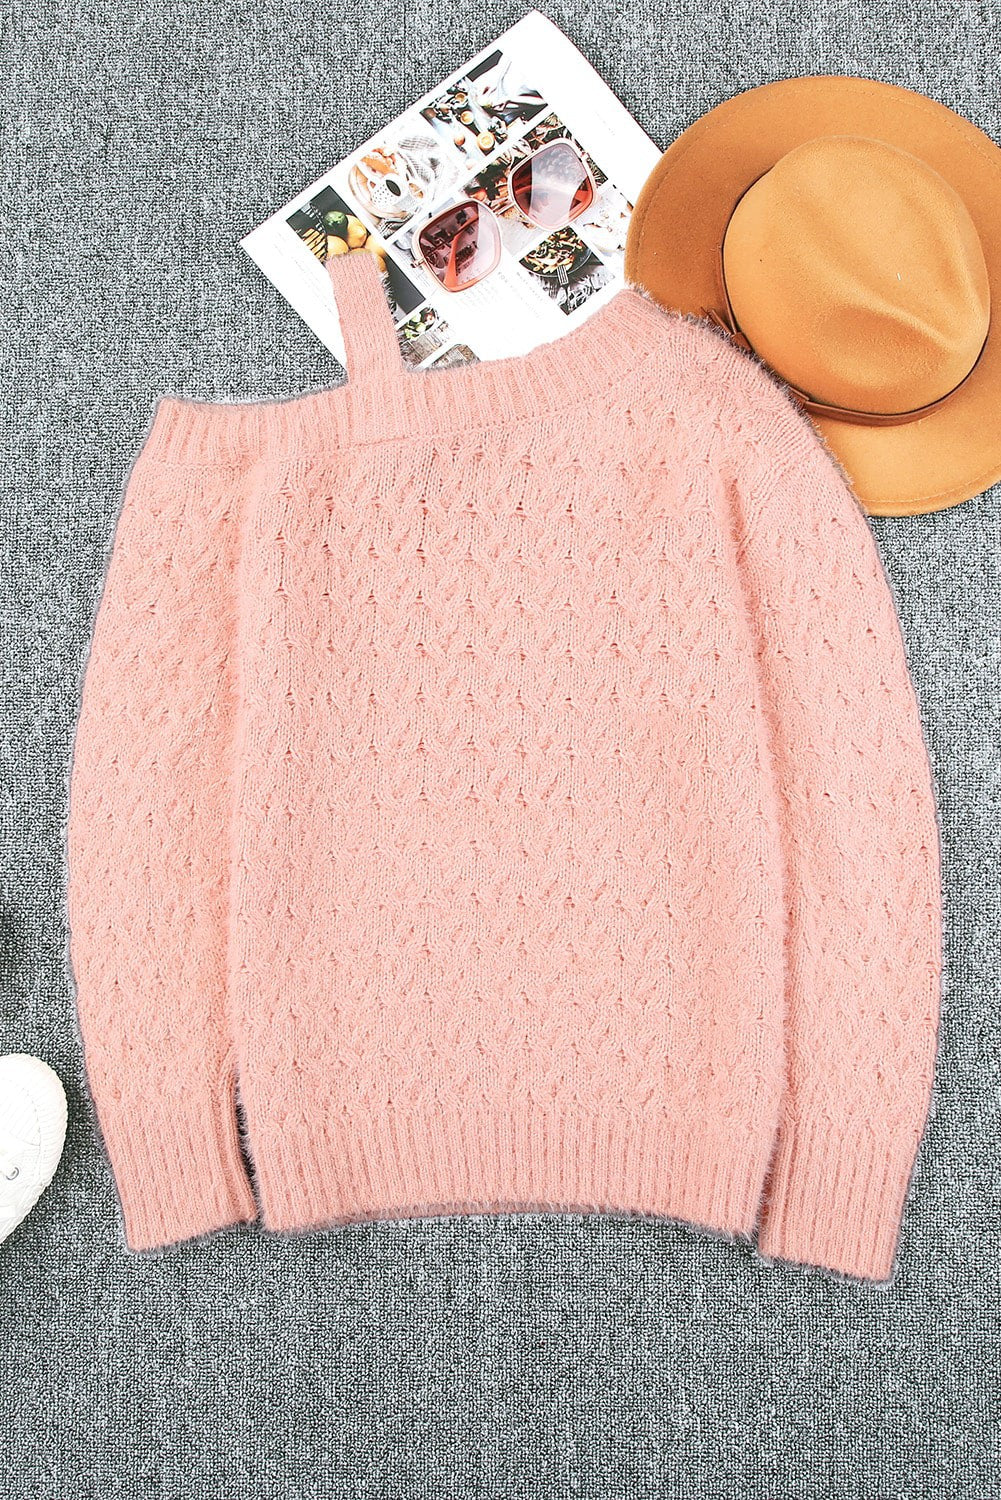 Sweater, One-sided Shoulder Cutout, Pink, Regular and Plus